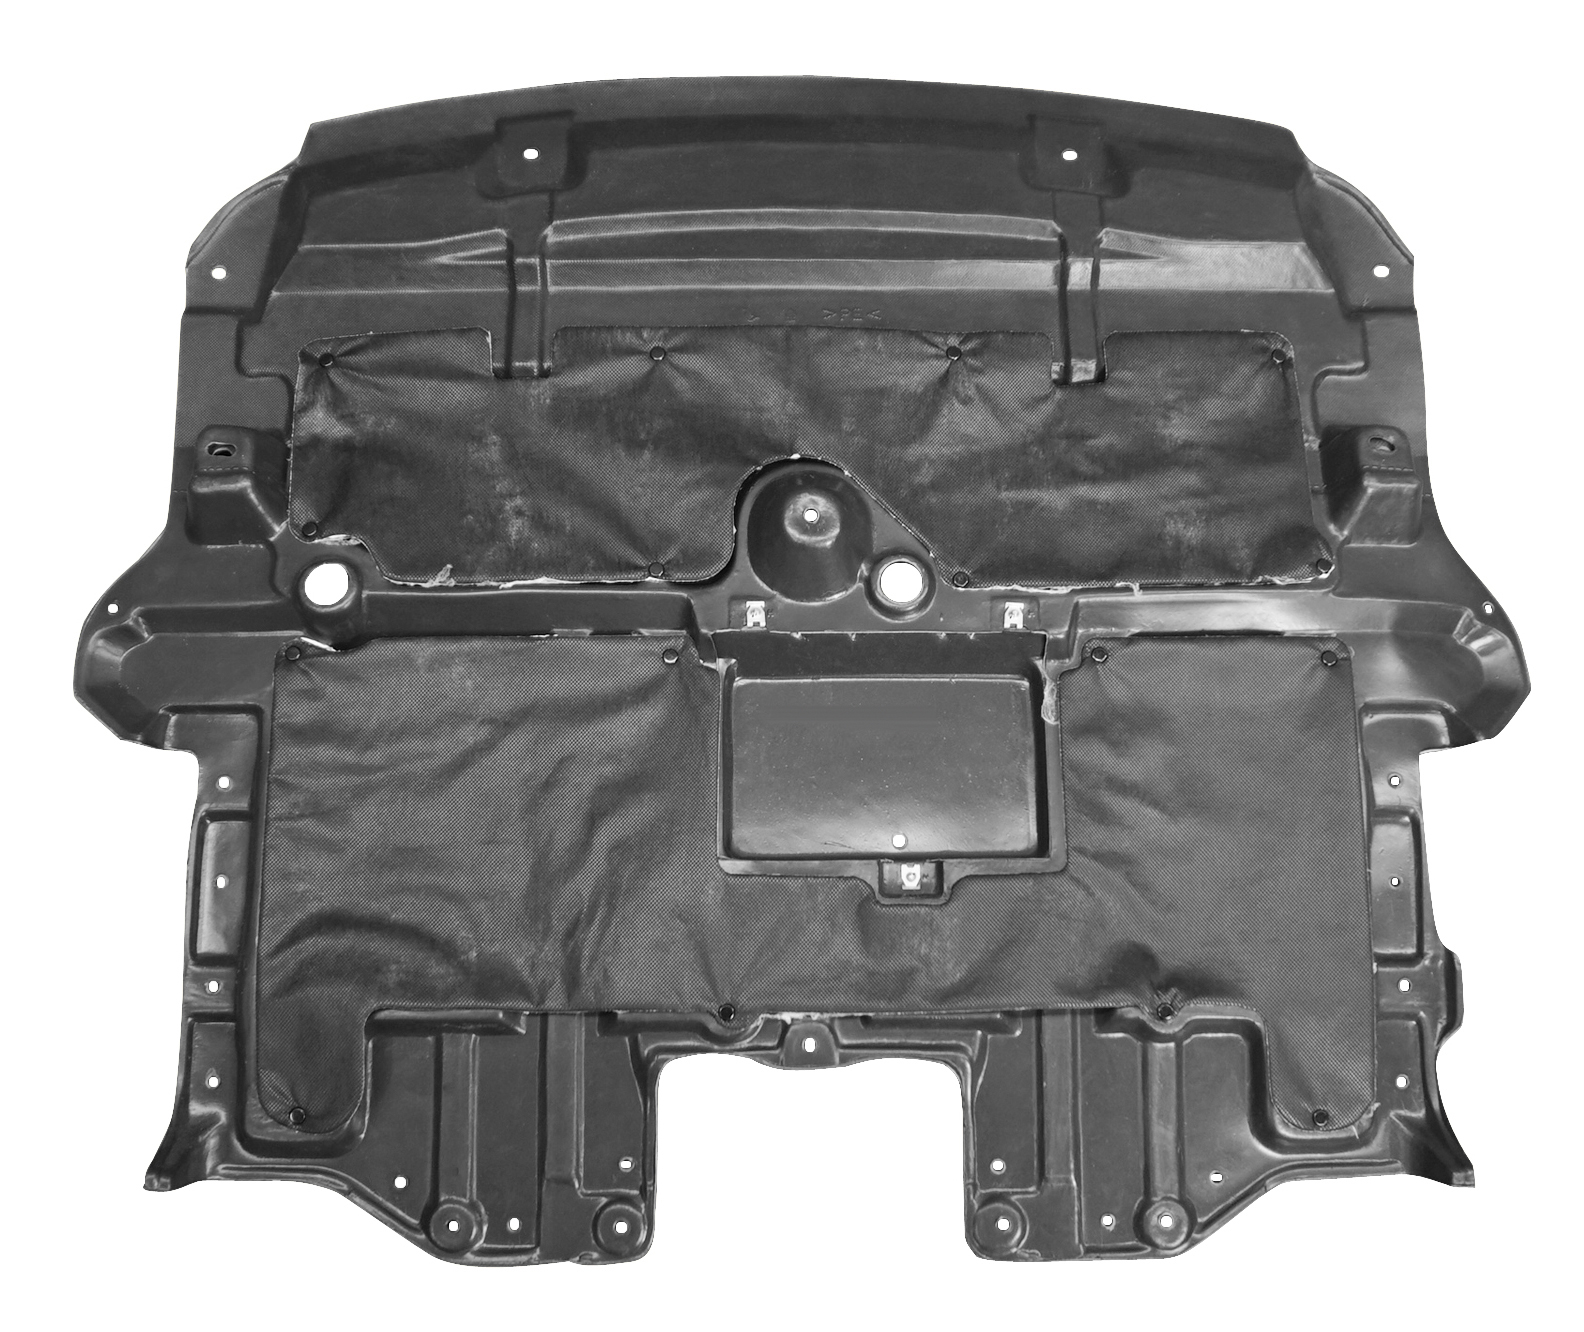 Aftermarket UNDER ENGINE COVERS for LEXUS - IS250, IS250,11-13,Lower engine cover